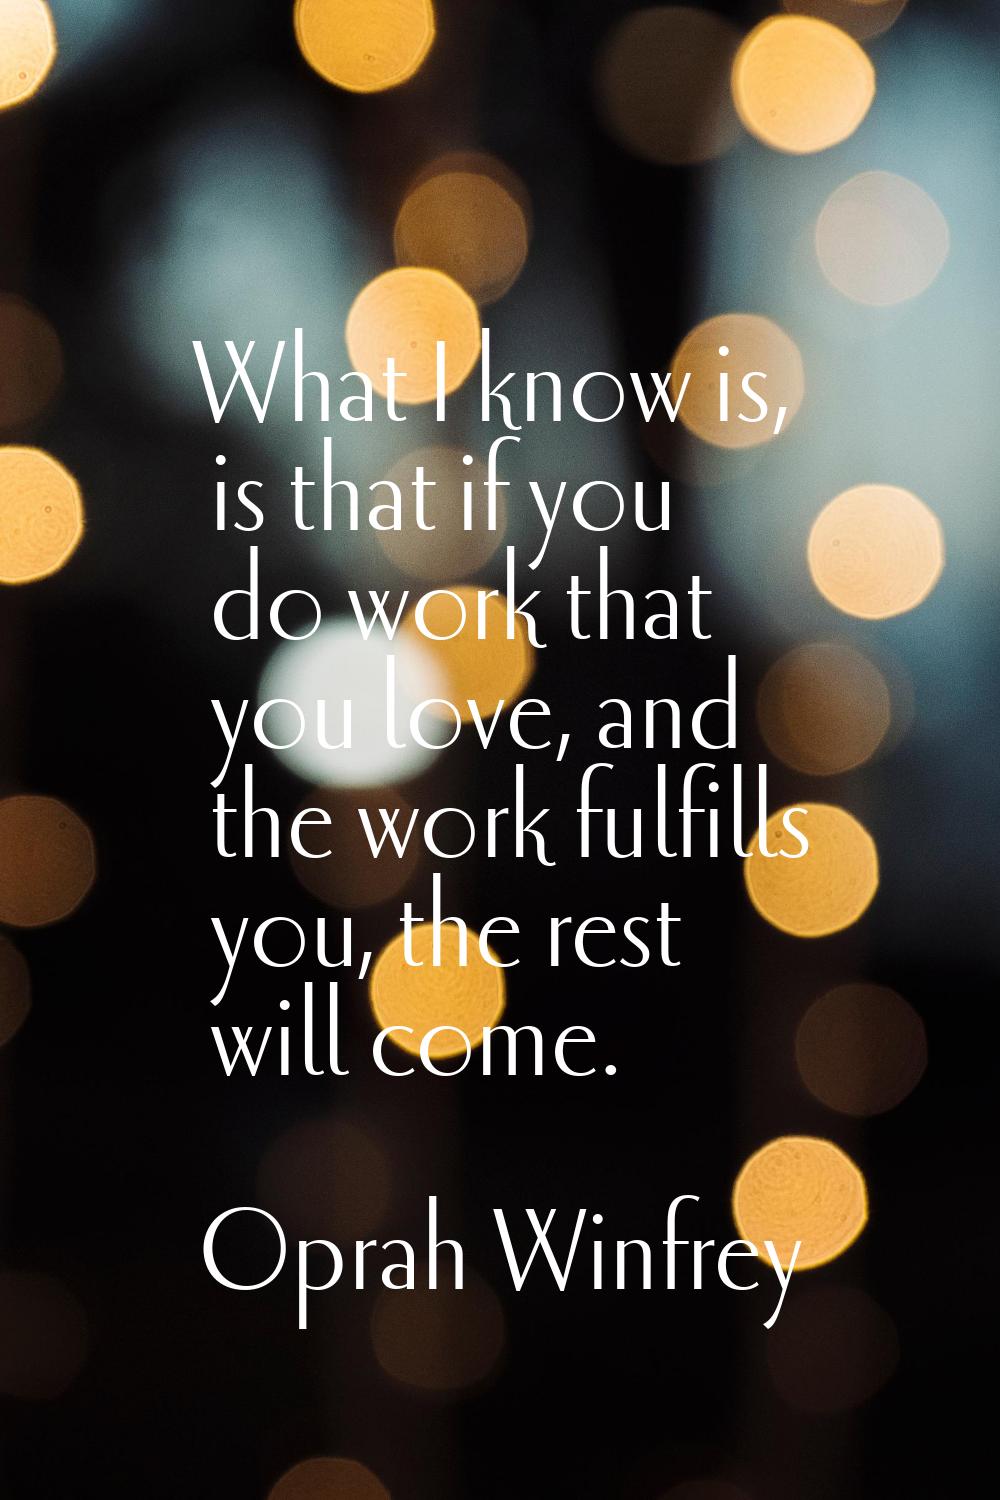 What I know is, is that if you do work that you love, and the work fulfills you, the rest will come